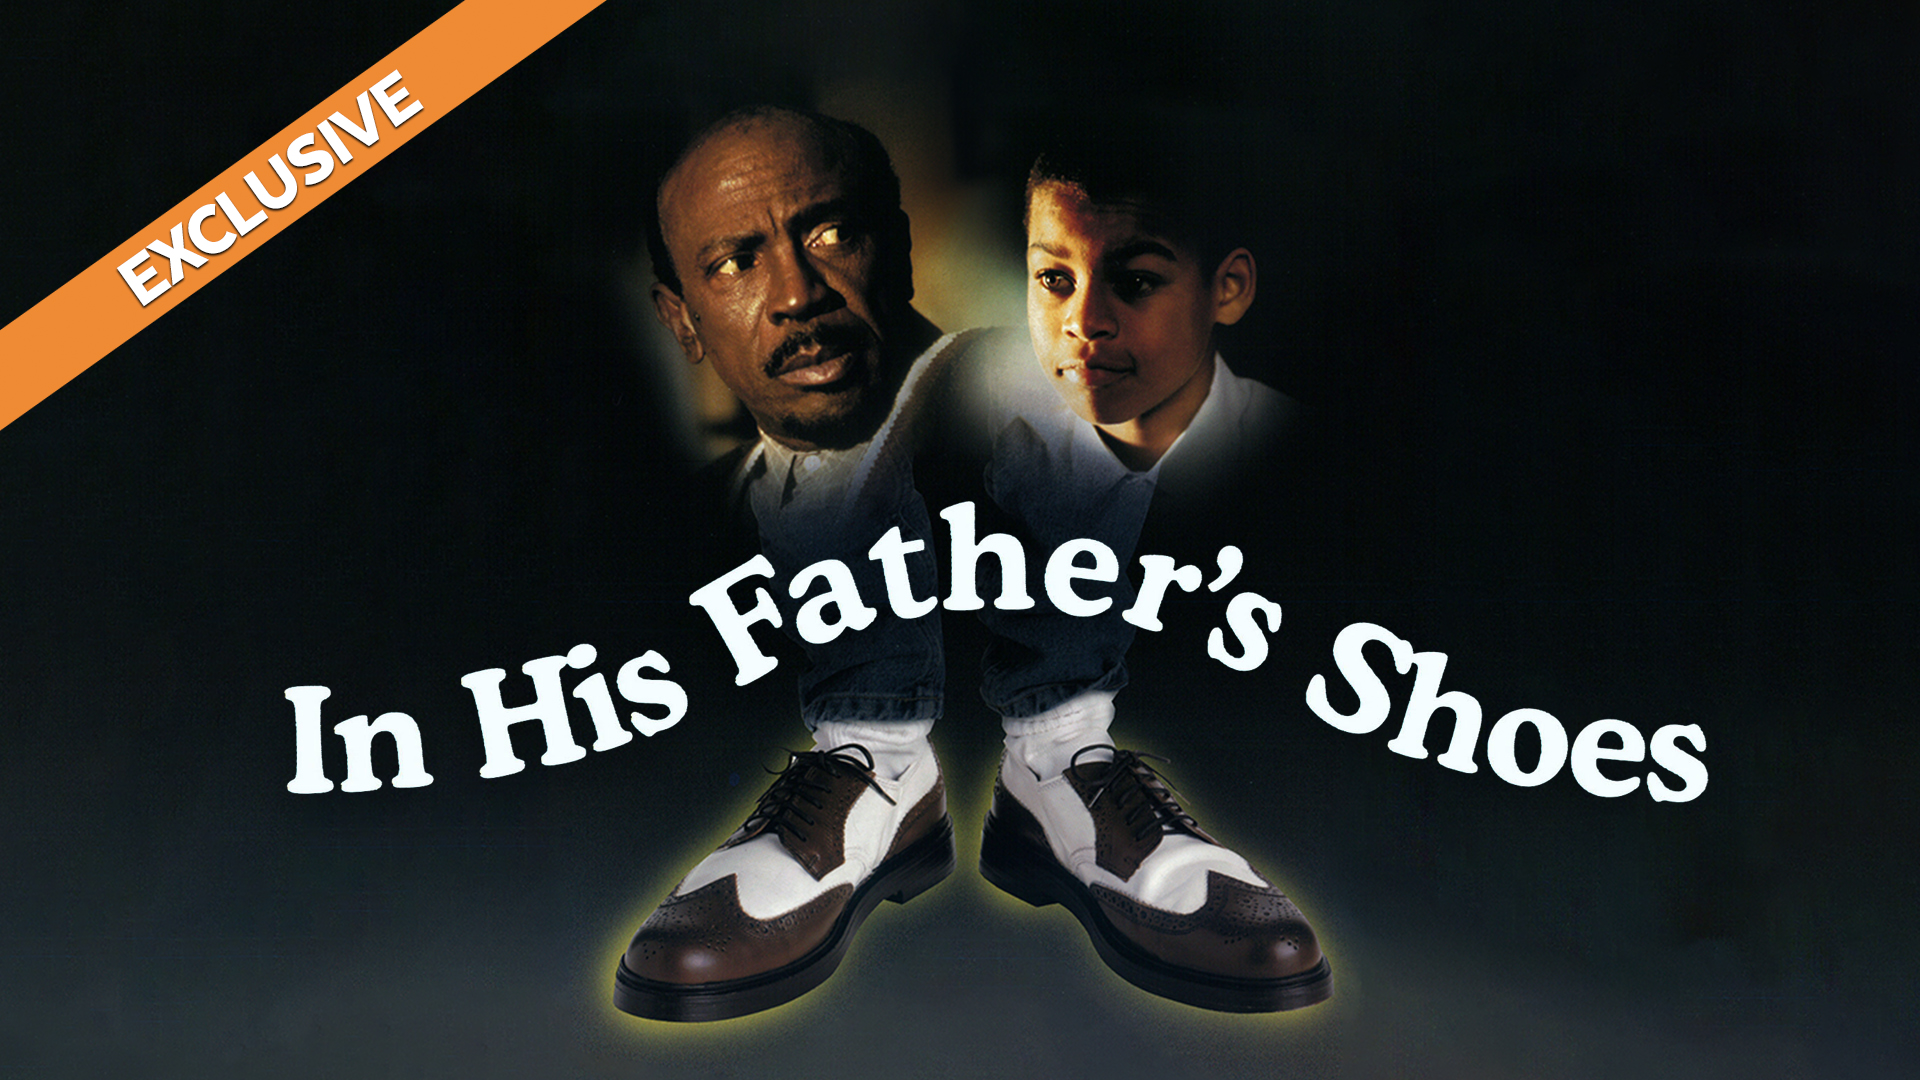 In His Fathers Shoes